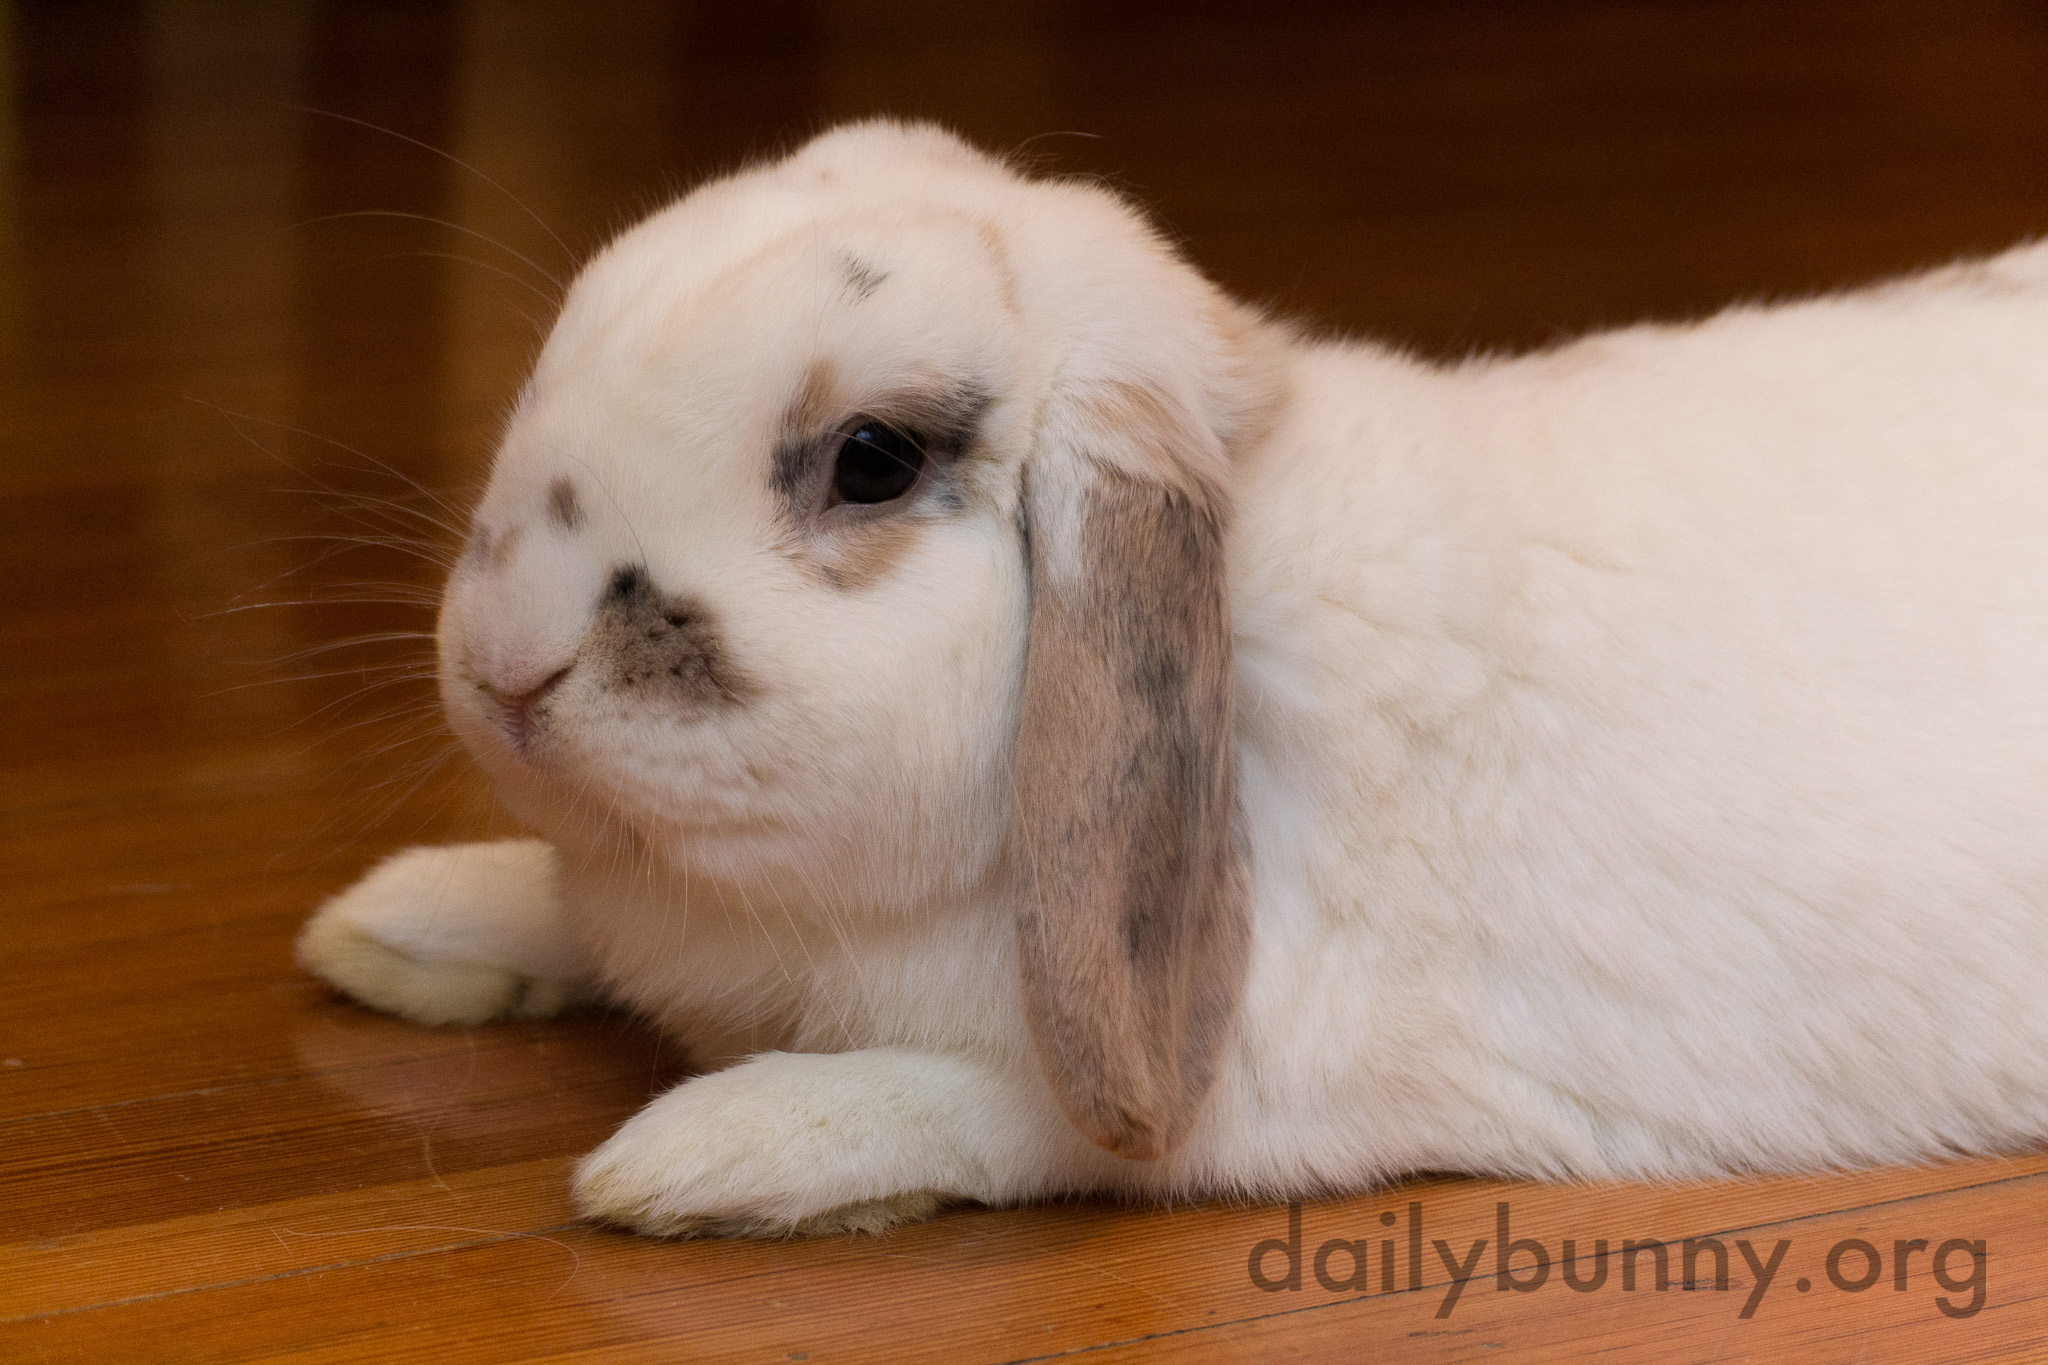 Bunny Cools Down On The Floor Before Jumping Back Up To Run Around